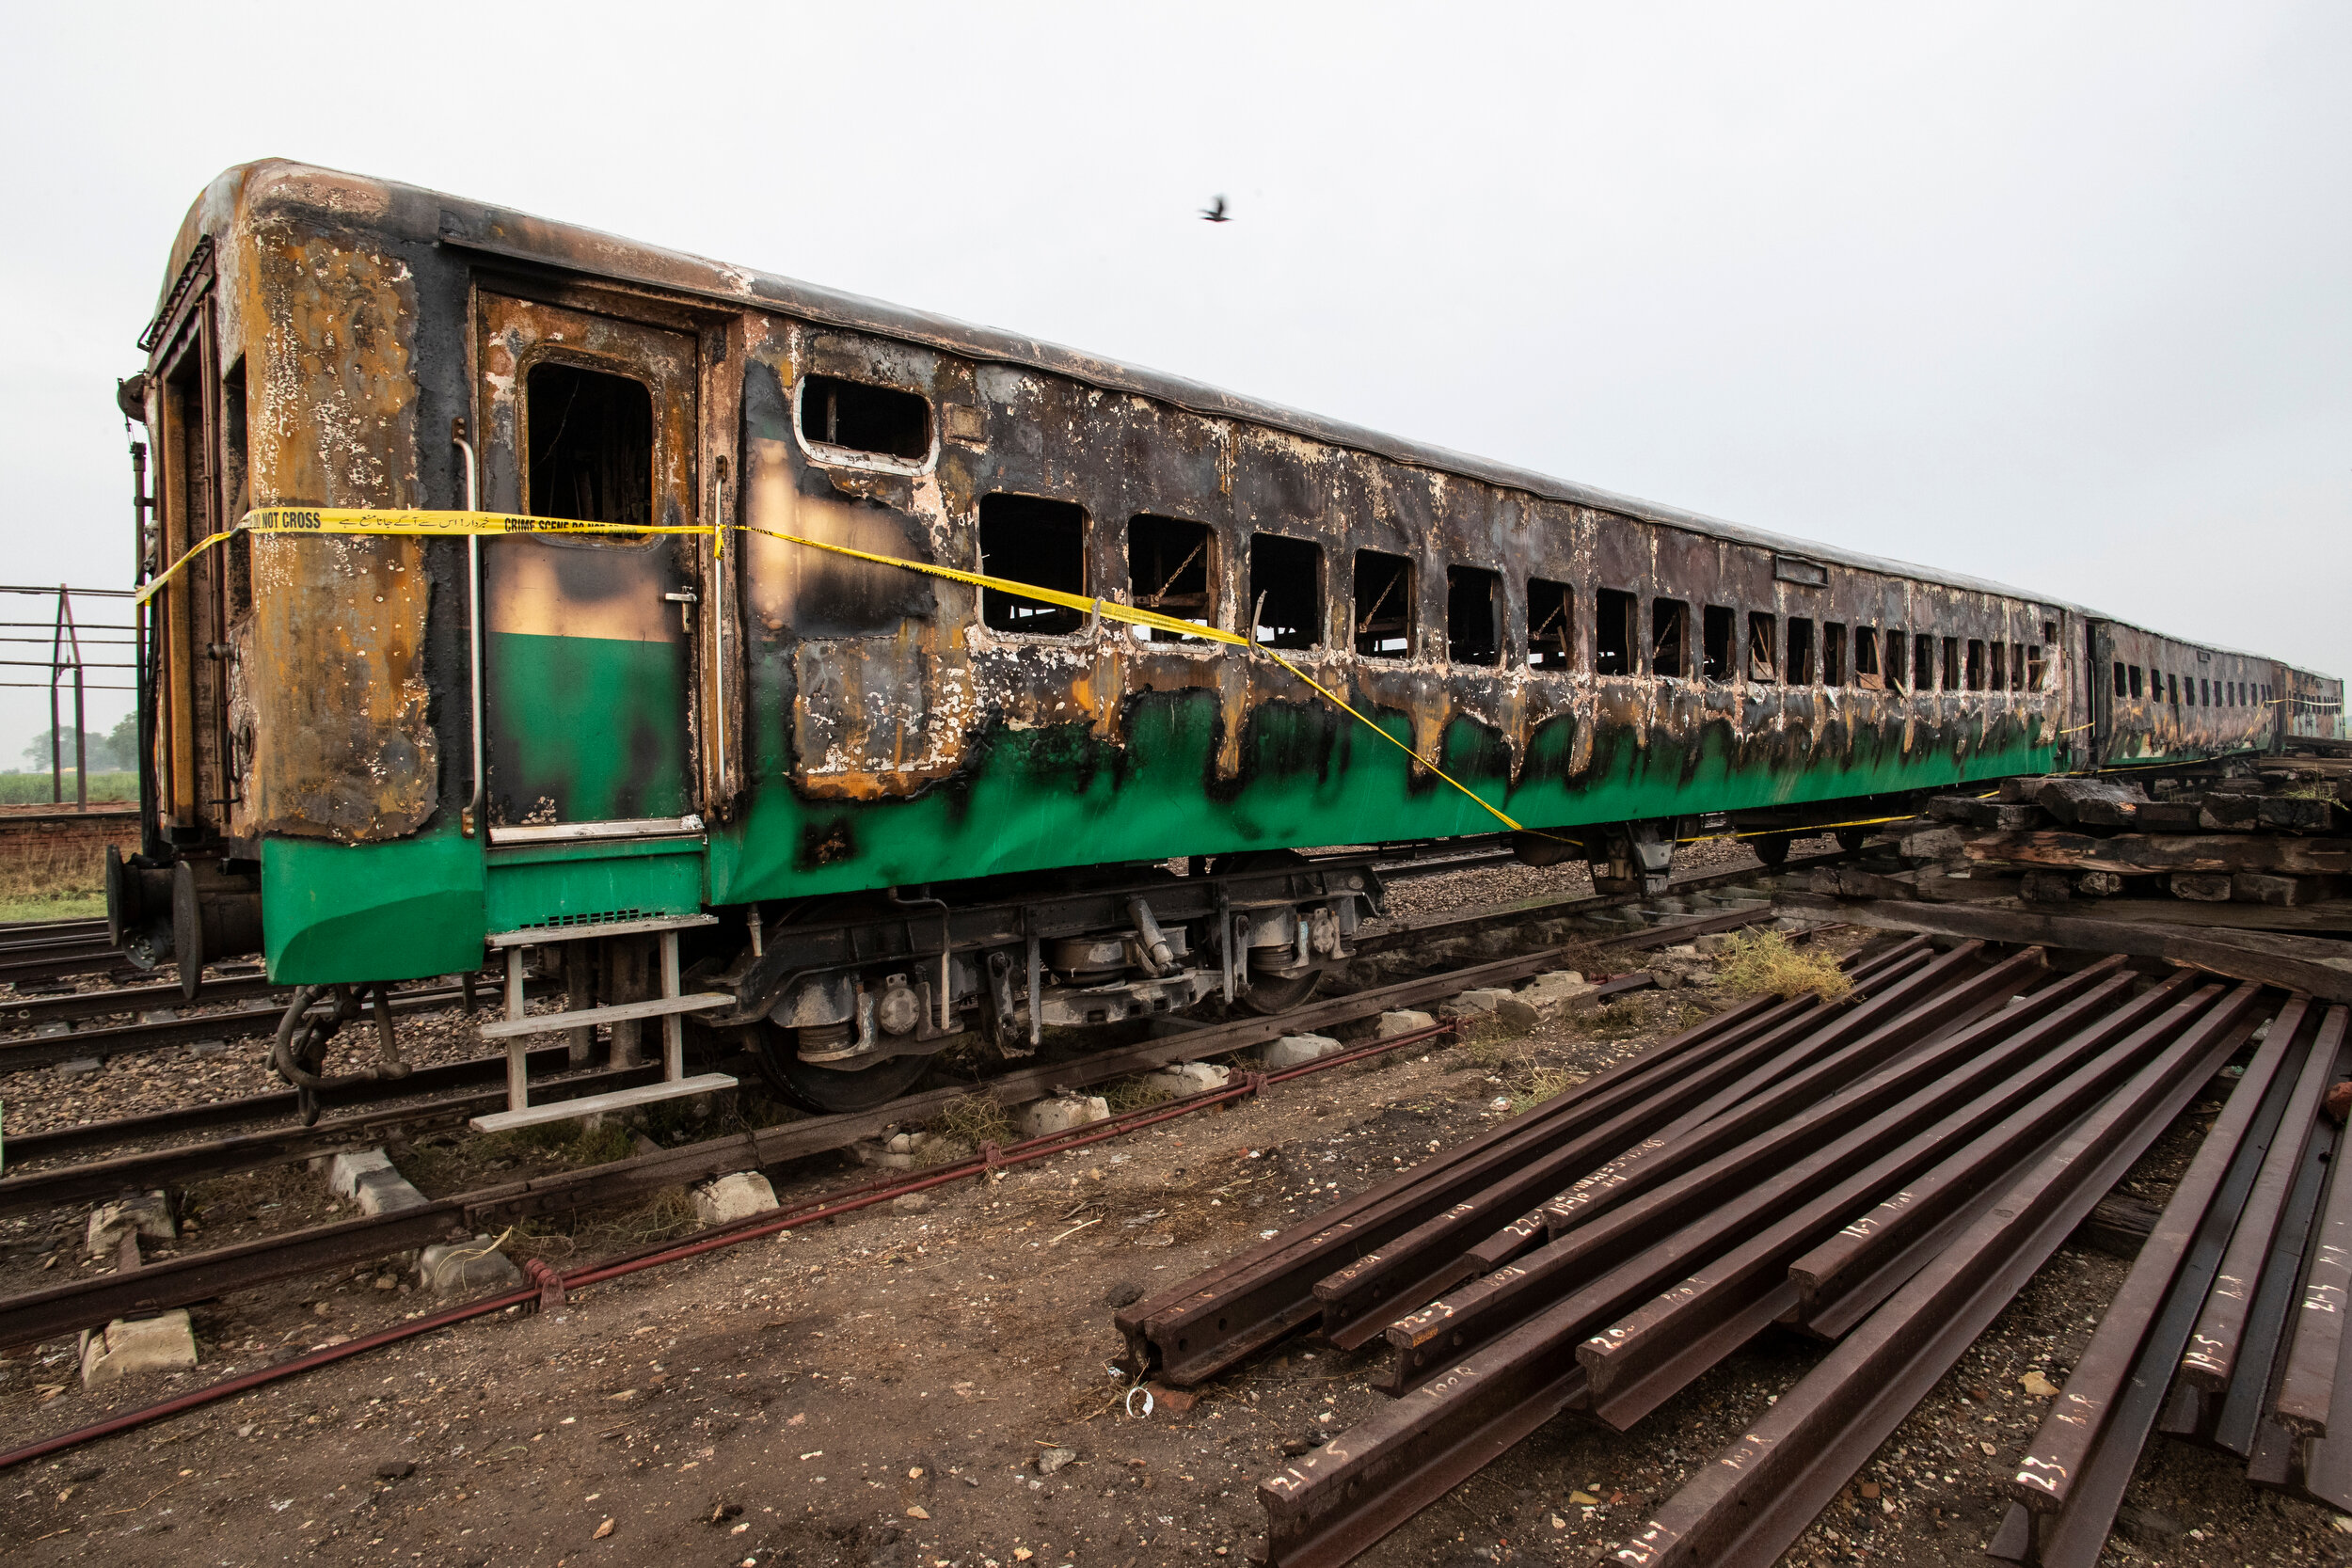  The remains of the burnt carriages a day after one of the deadliest train accidents in Pakistan’s history at a railway station in Channi Gote, Pakistan where the train finally stopped. Nov 1, 2019 